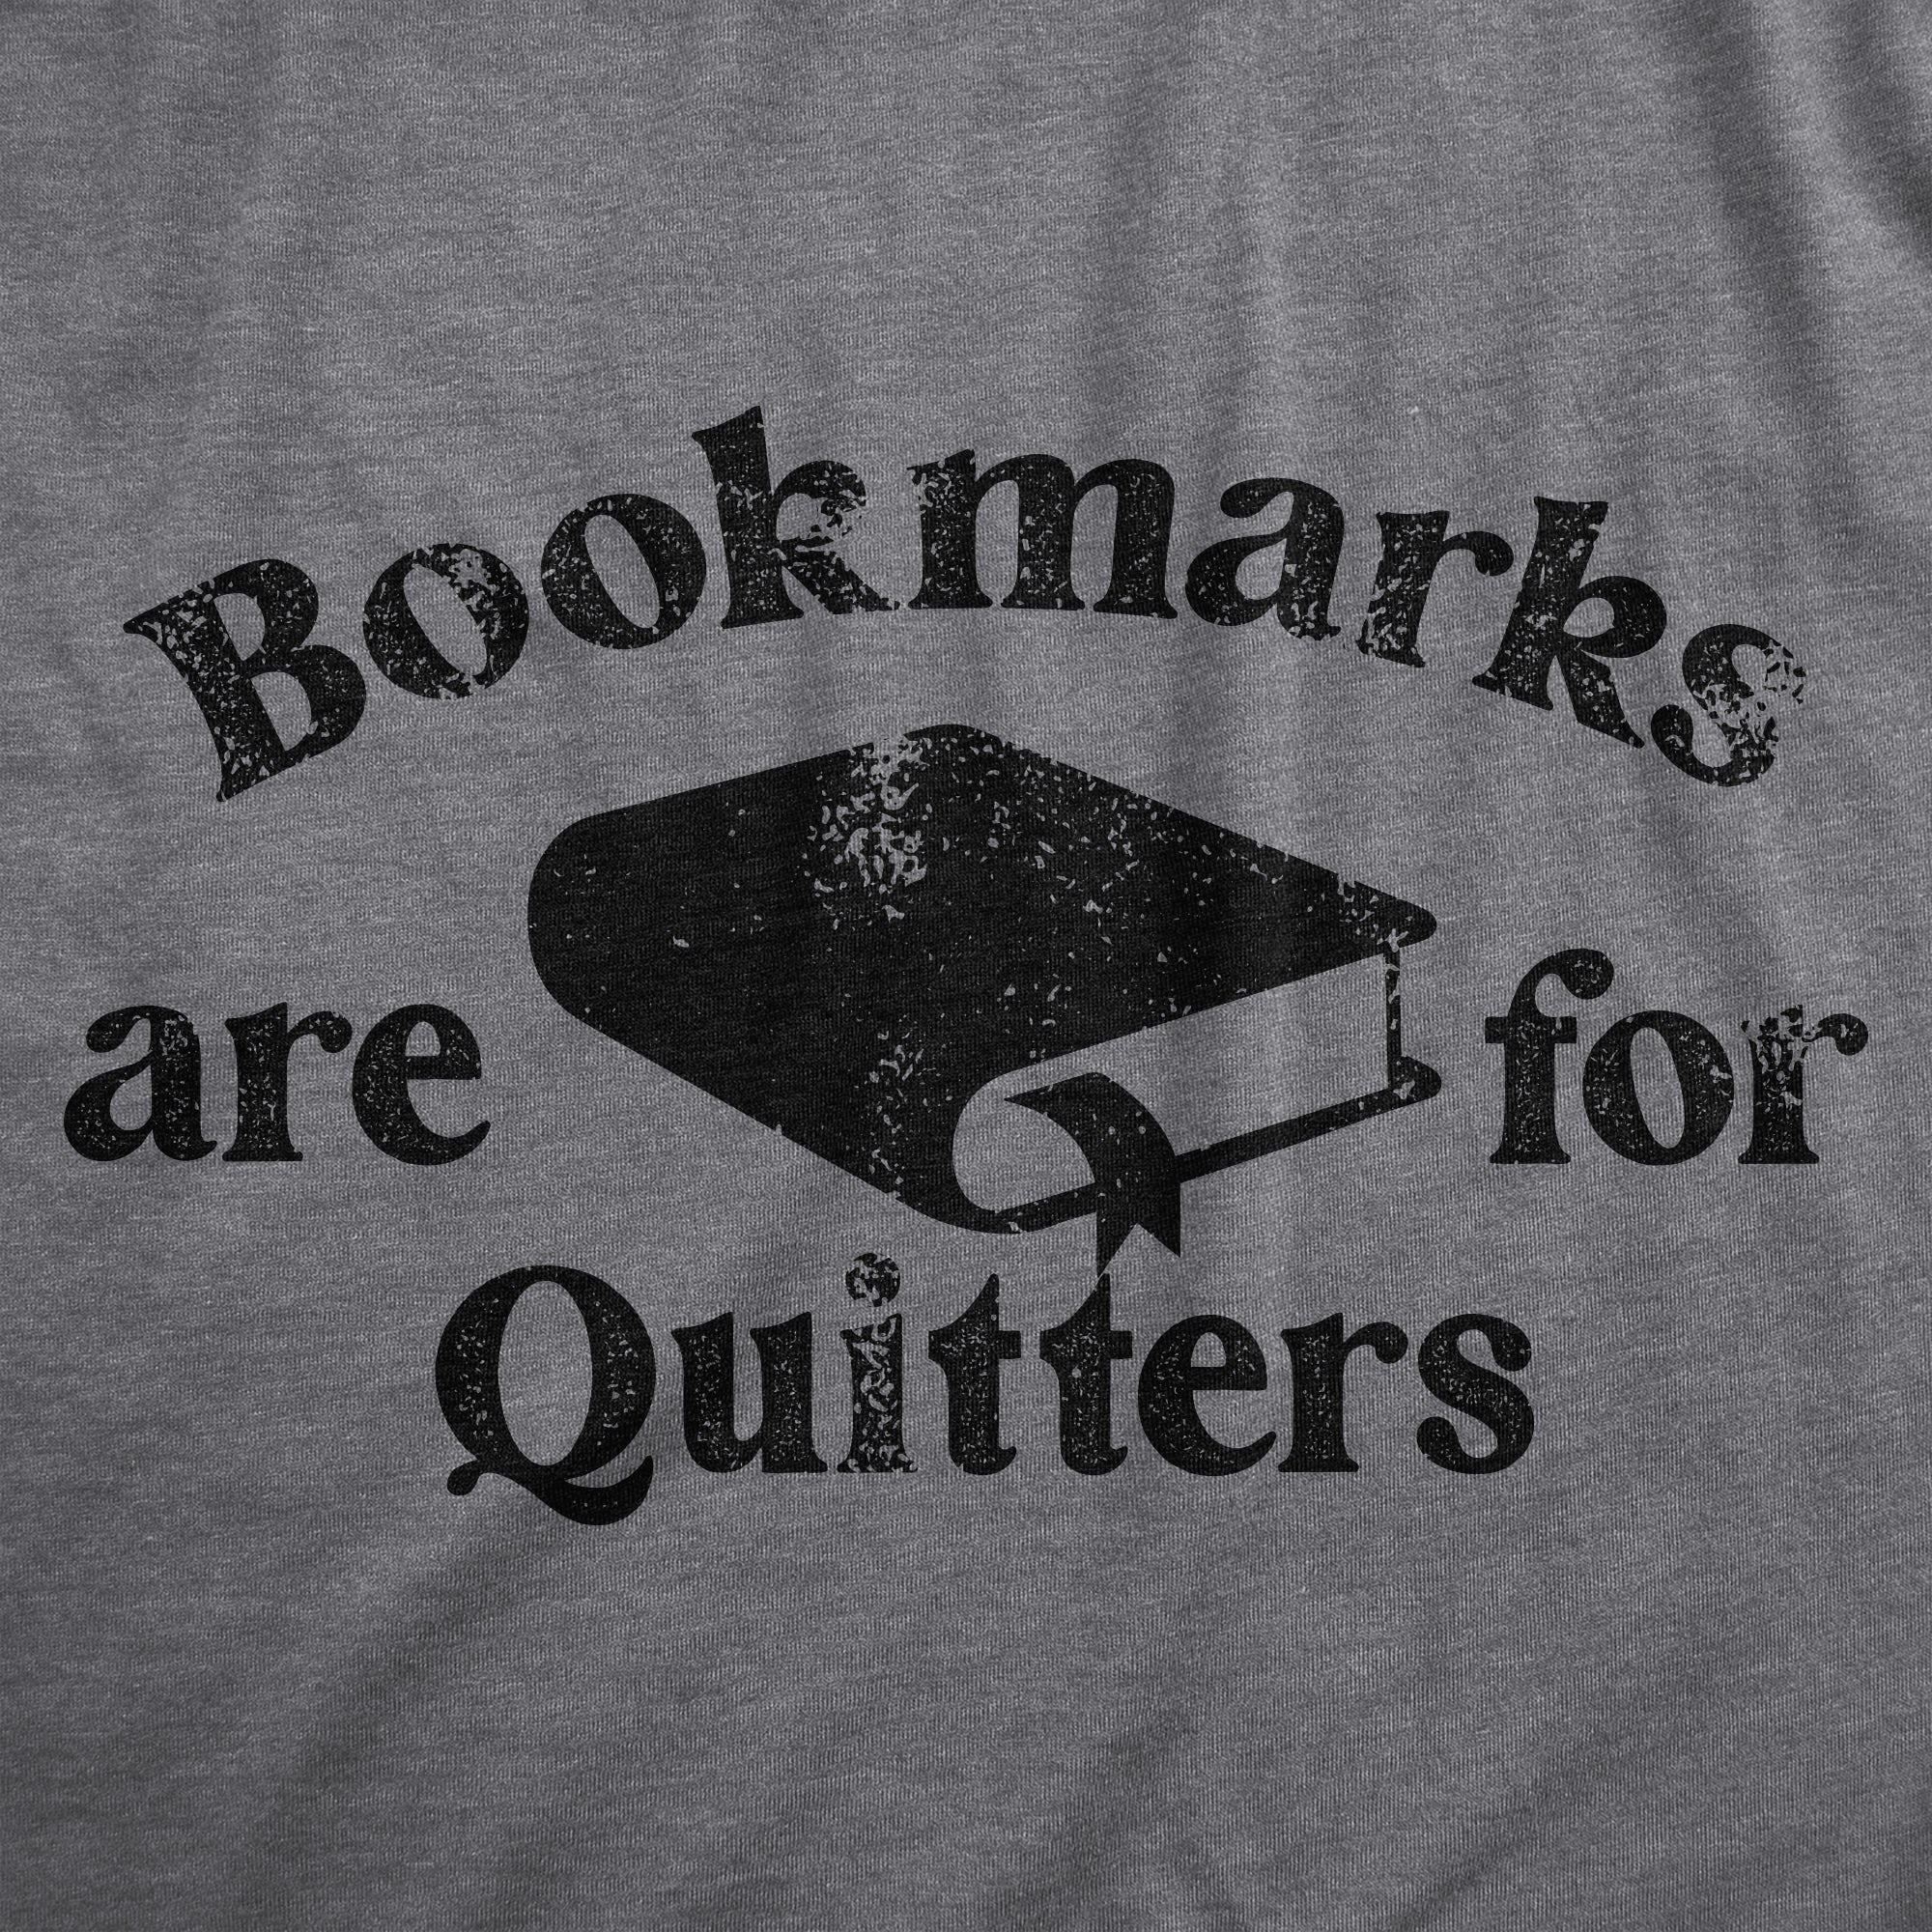 Funny Dark Heather Grey - QUITTERS Bookmarks Are For Quitters Mens T Shirt Nerdy Nerdy sarcastic Tee